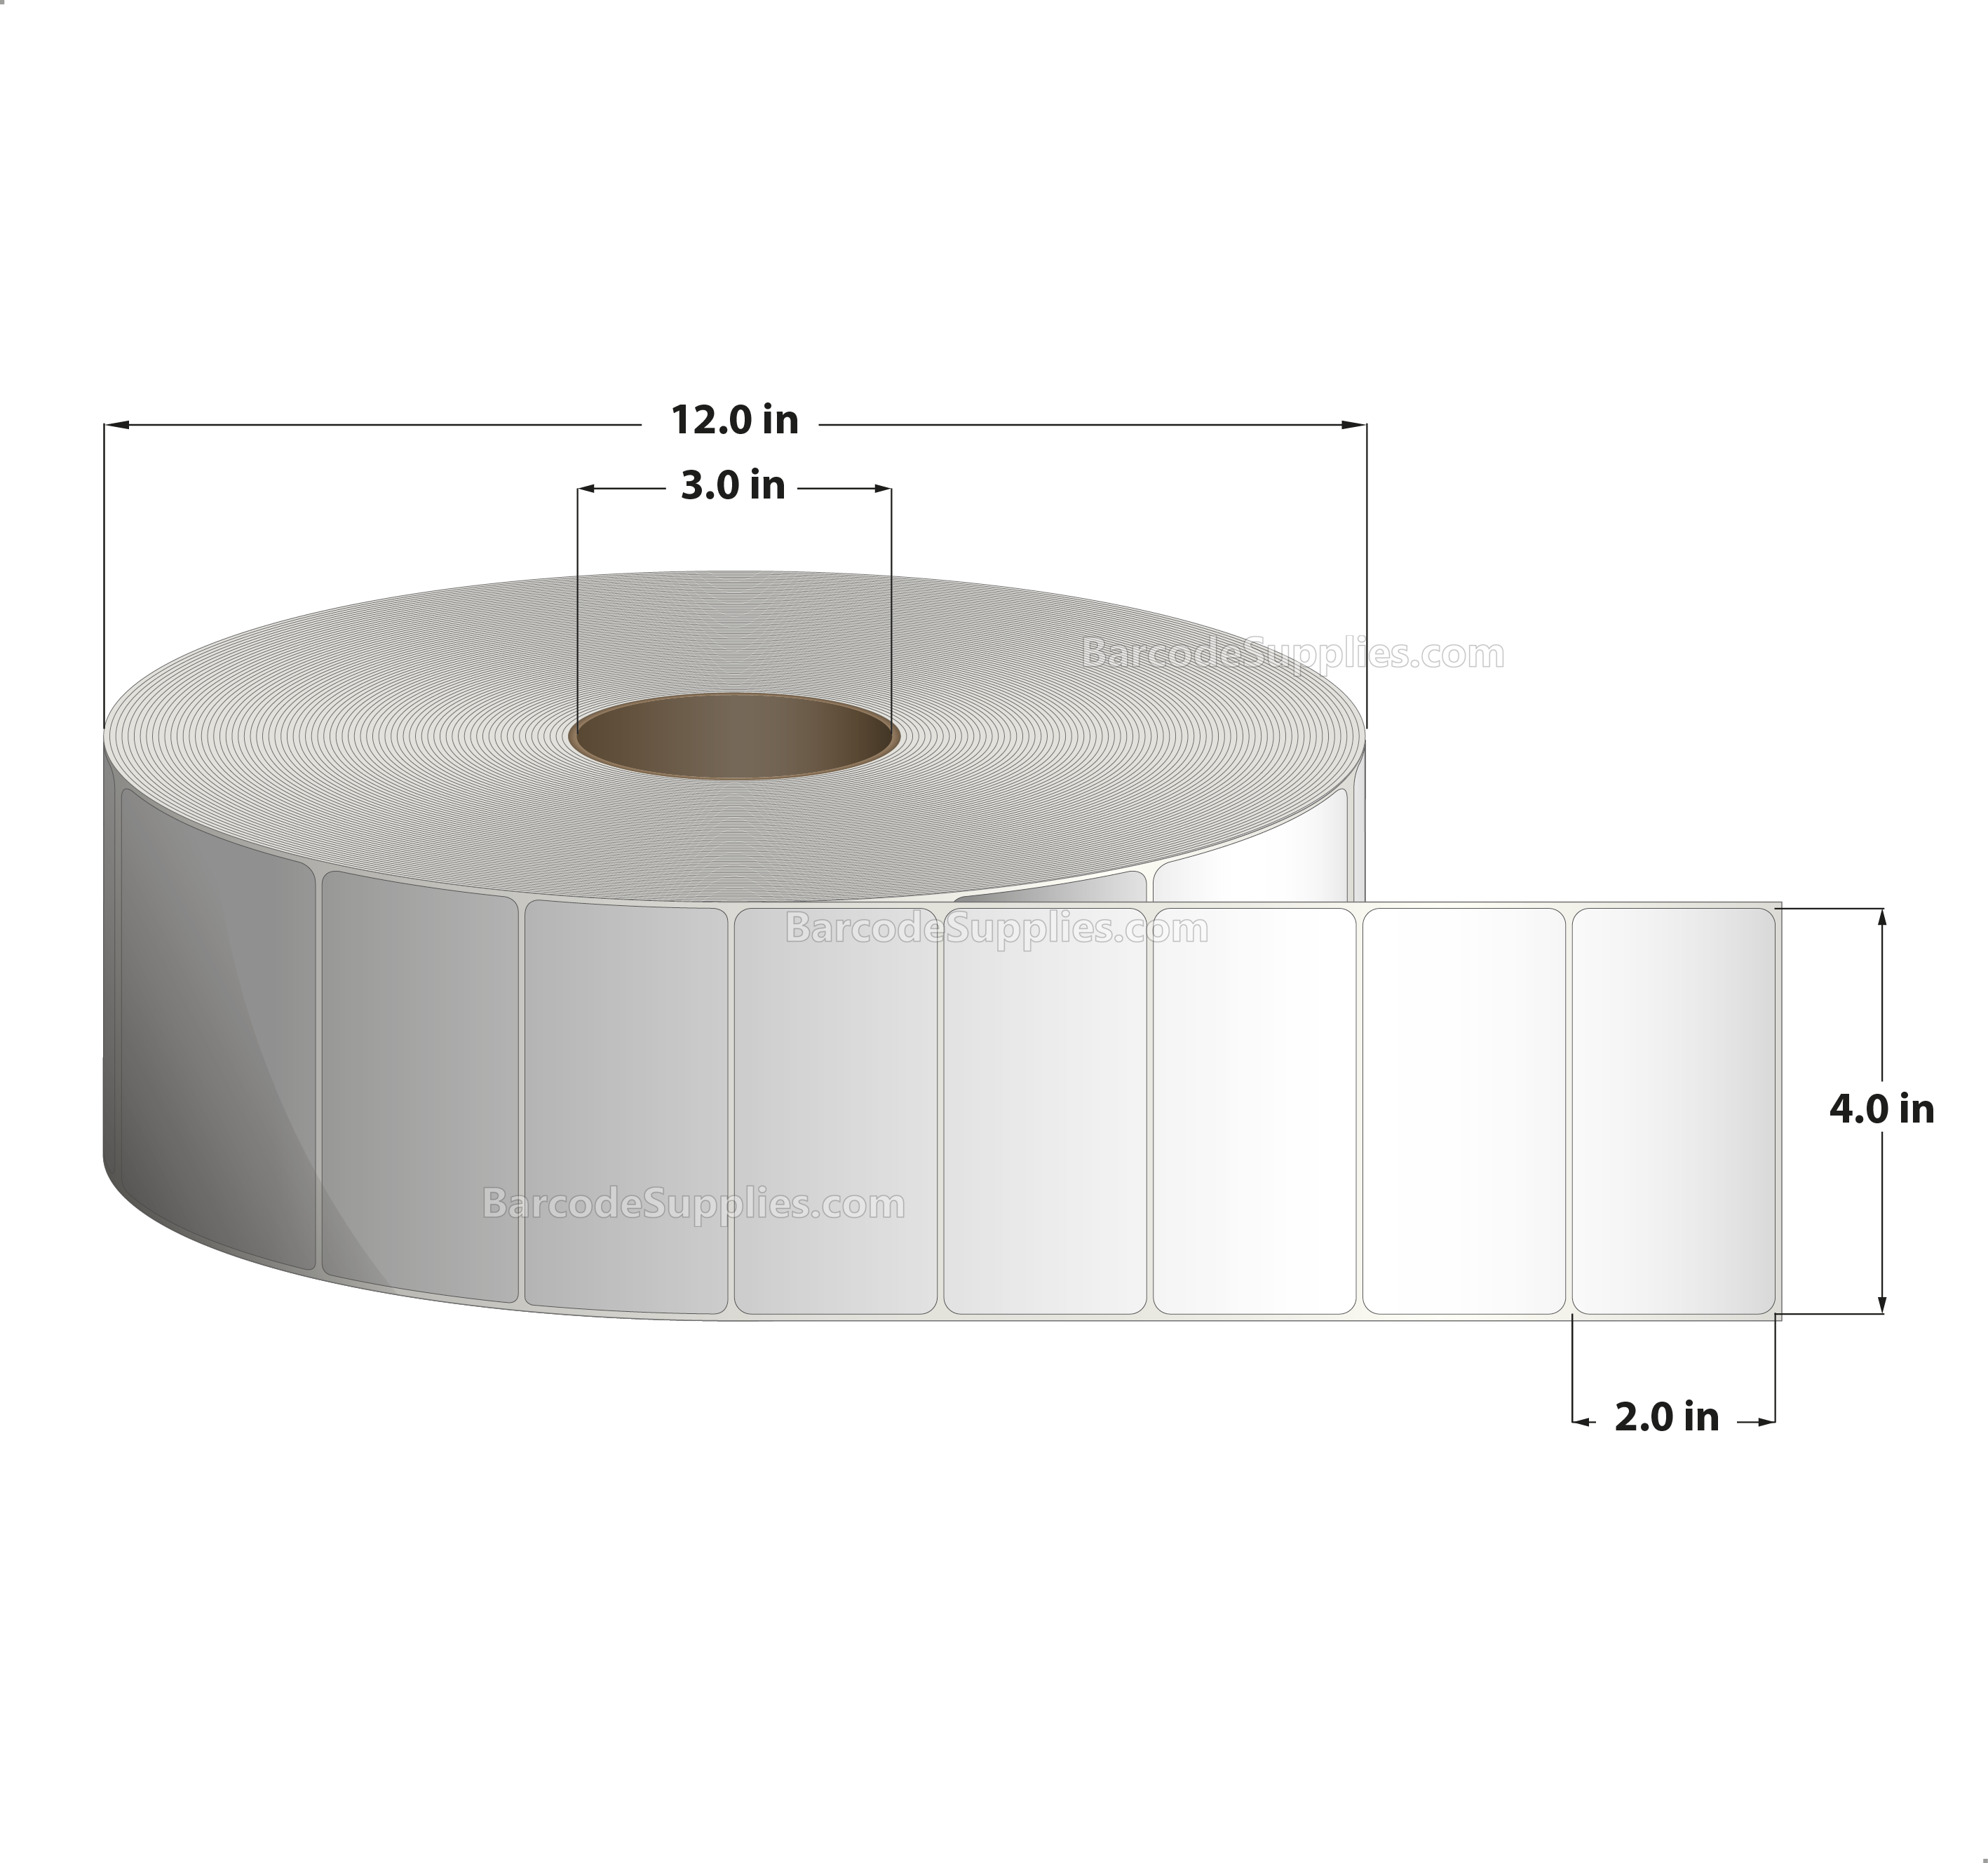 4 x 2 Thermal Transfer White Labels With Permanent Adhesive - No Perforation - 7595 Labels Per Roll - Carton Of 3 Rolls - 22785 Labels Total - MPN: RT-4-2-7595-NP